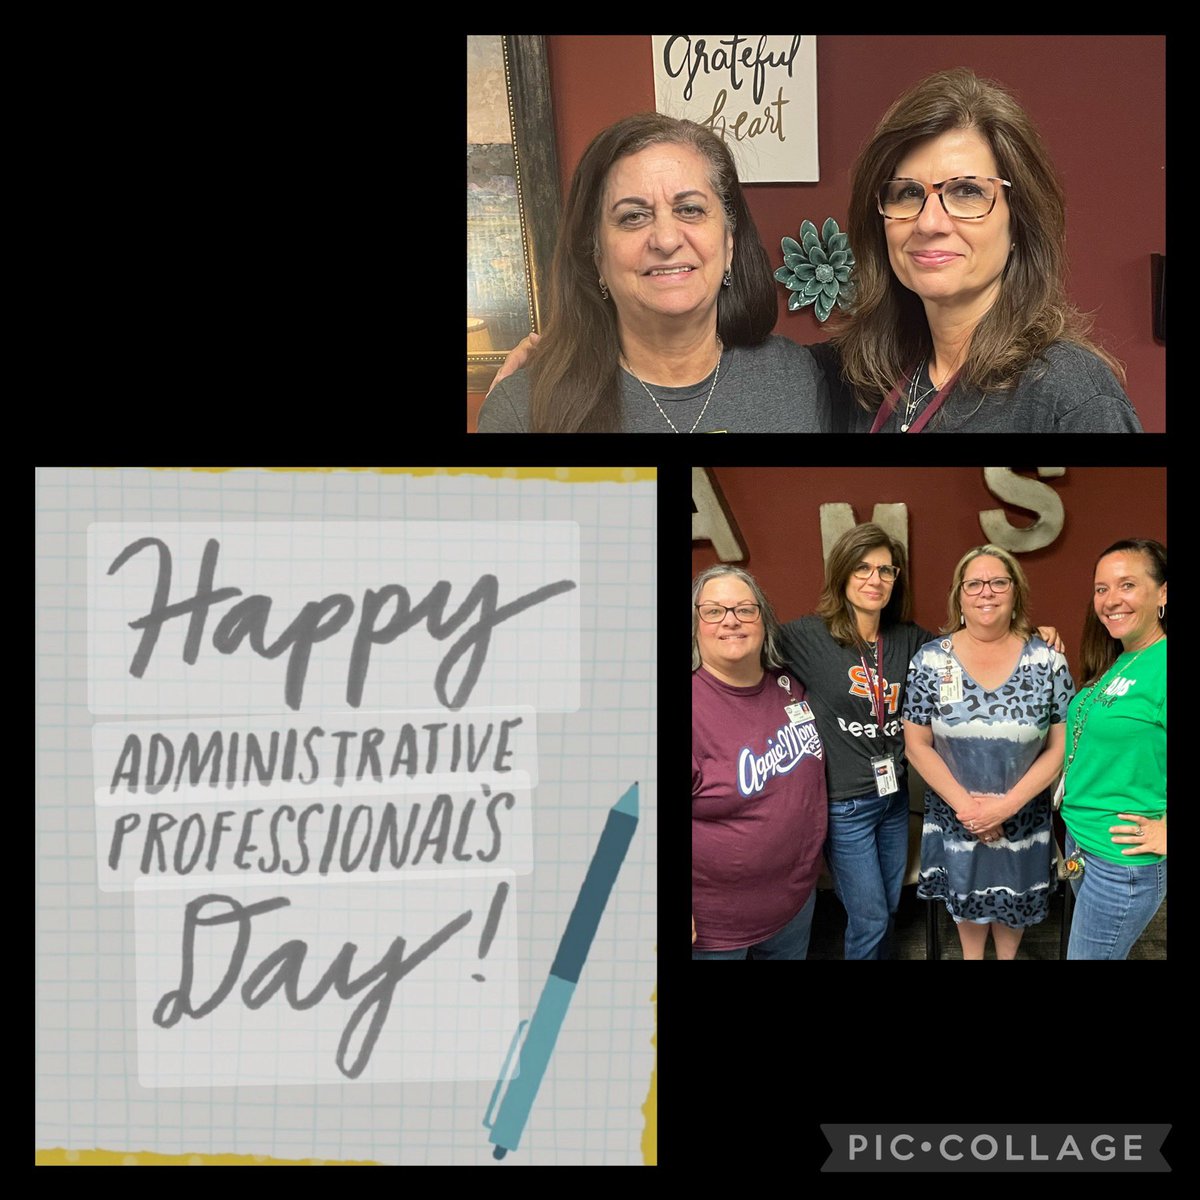 Arnold Middle School appreciates Ms. Durham, Ms. Baird, Ms. Huckins, Ms. Withington, and Ms. Tannous for keeping us organized and productive!  They are the glue that binds us together!  Thank you, ladies! #theresnoplacelikearnold #BringingOutTheBest